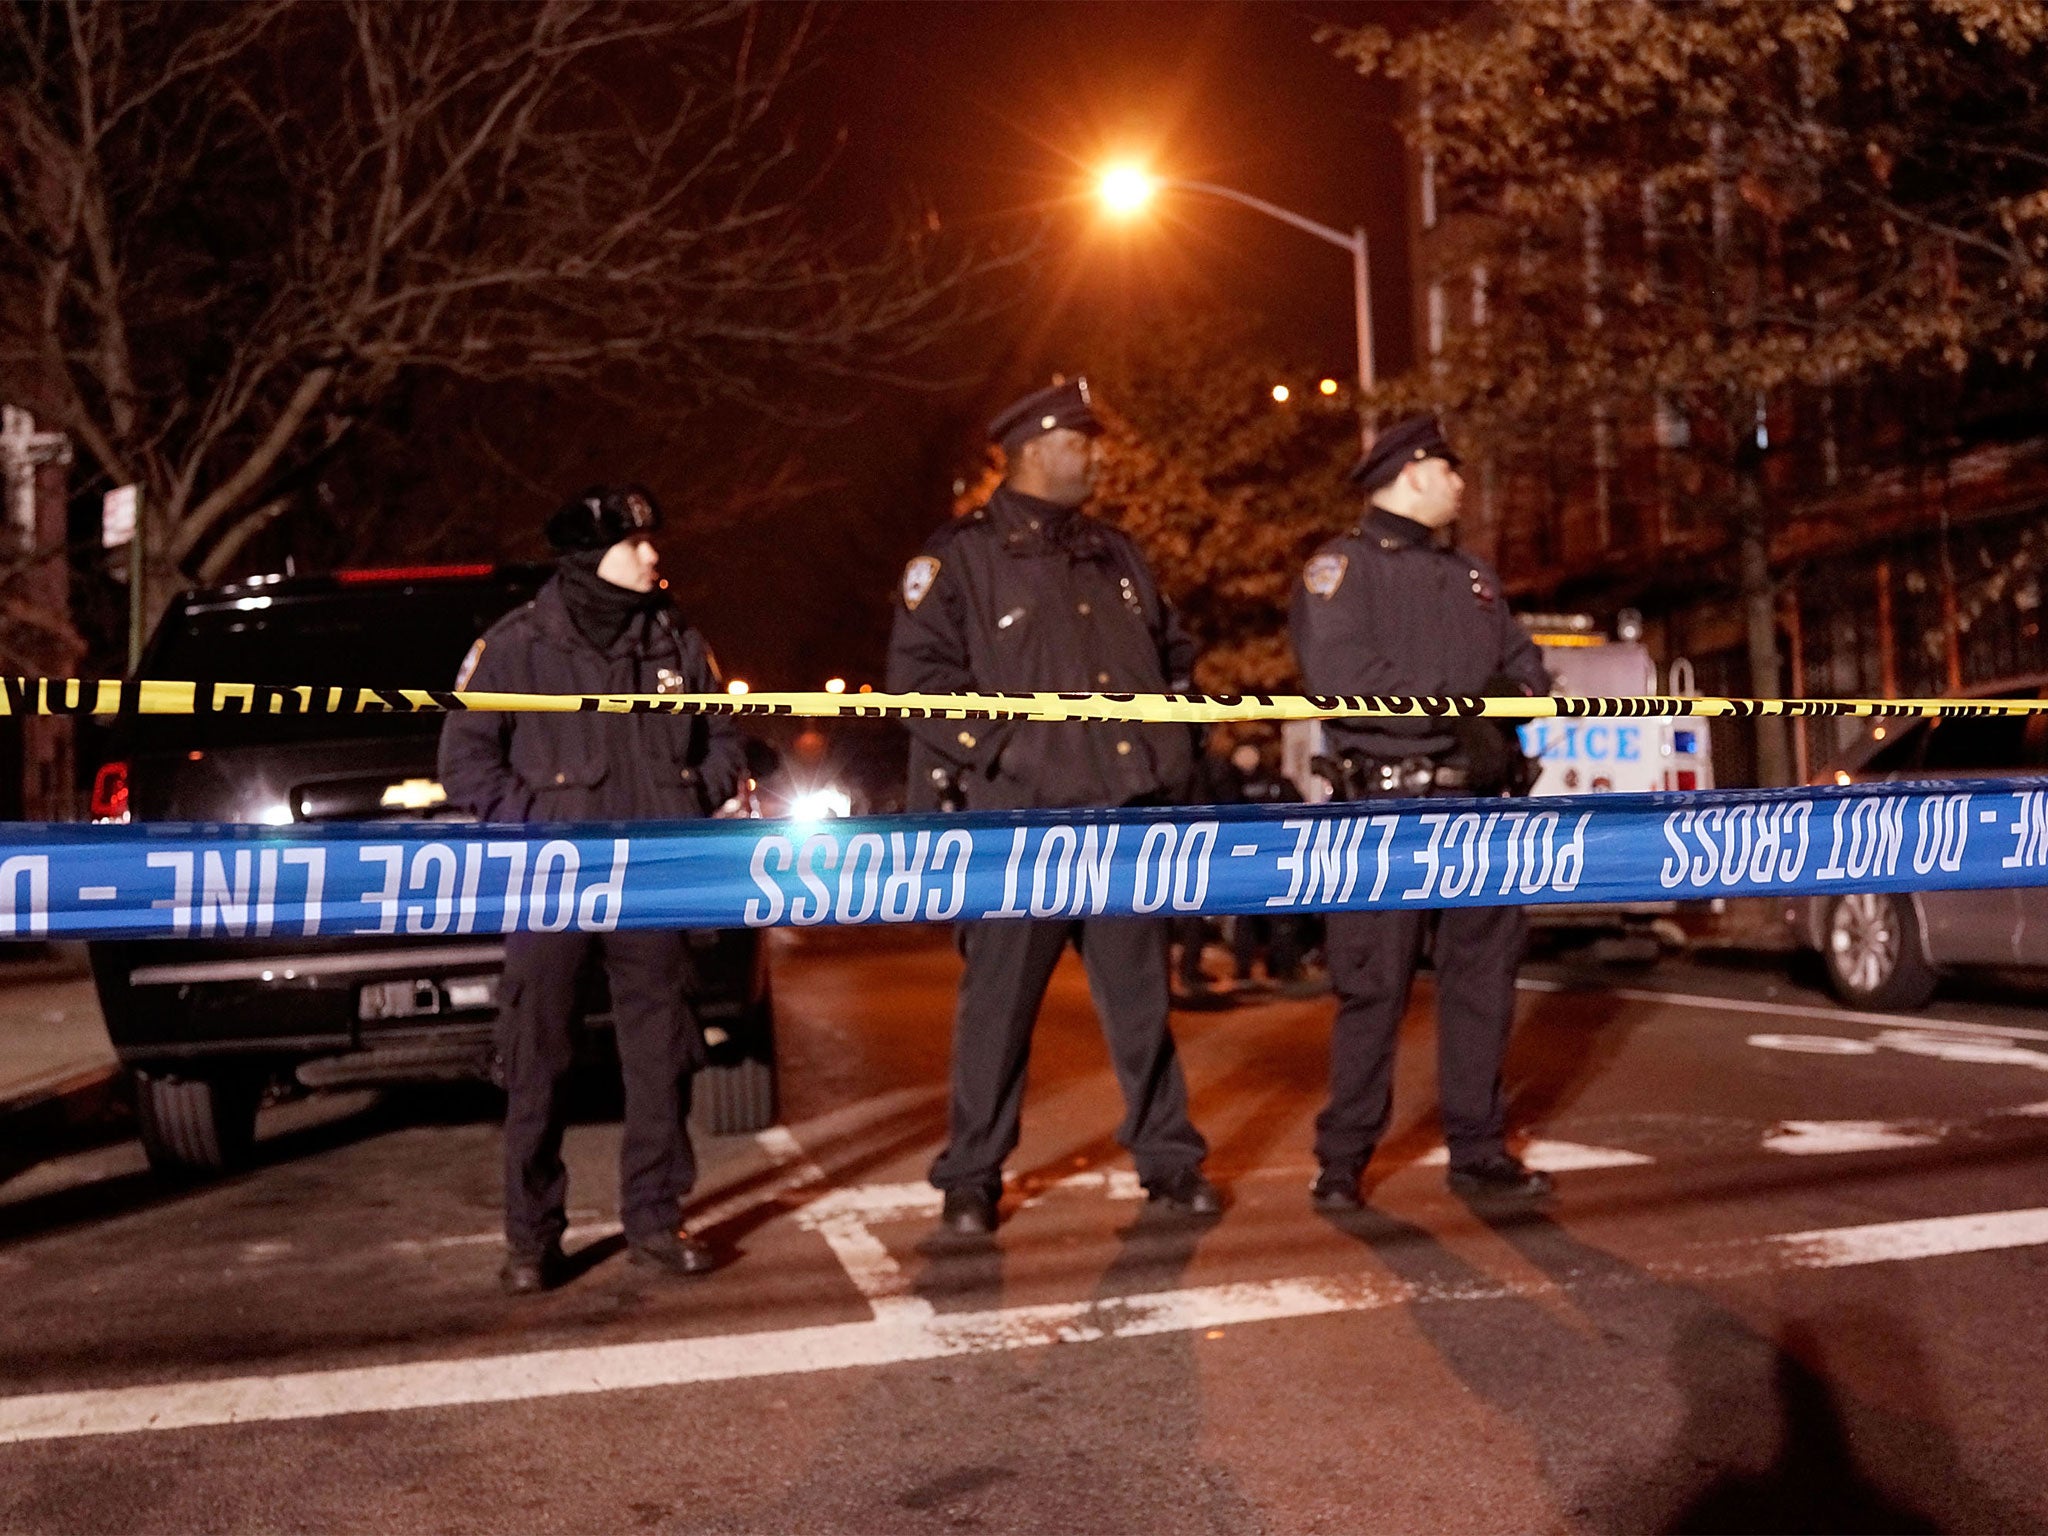 20 December 2014: The scene where two New York City police officers were killed as they sat in their marked police car on a Brooklyn street corner